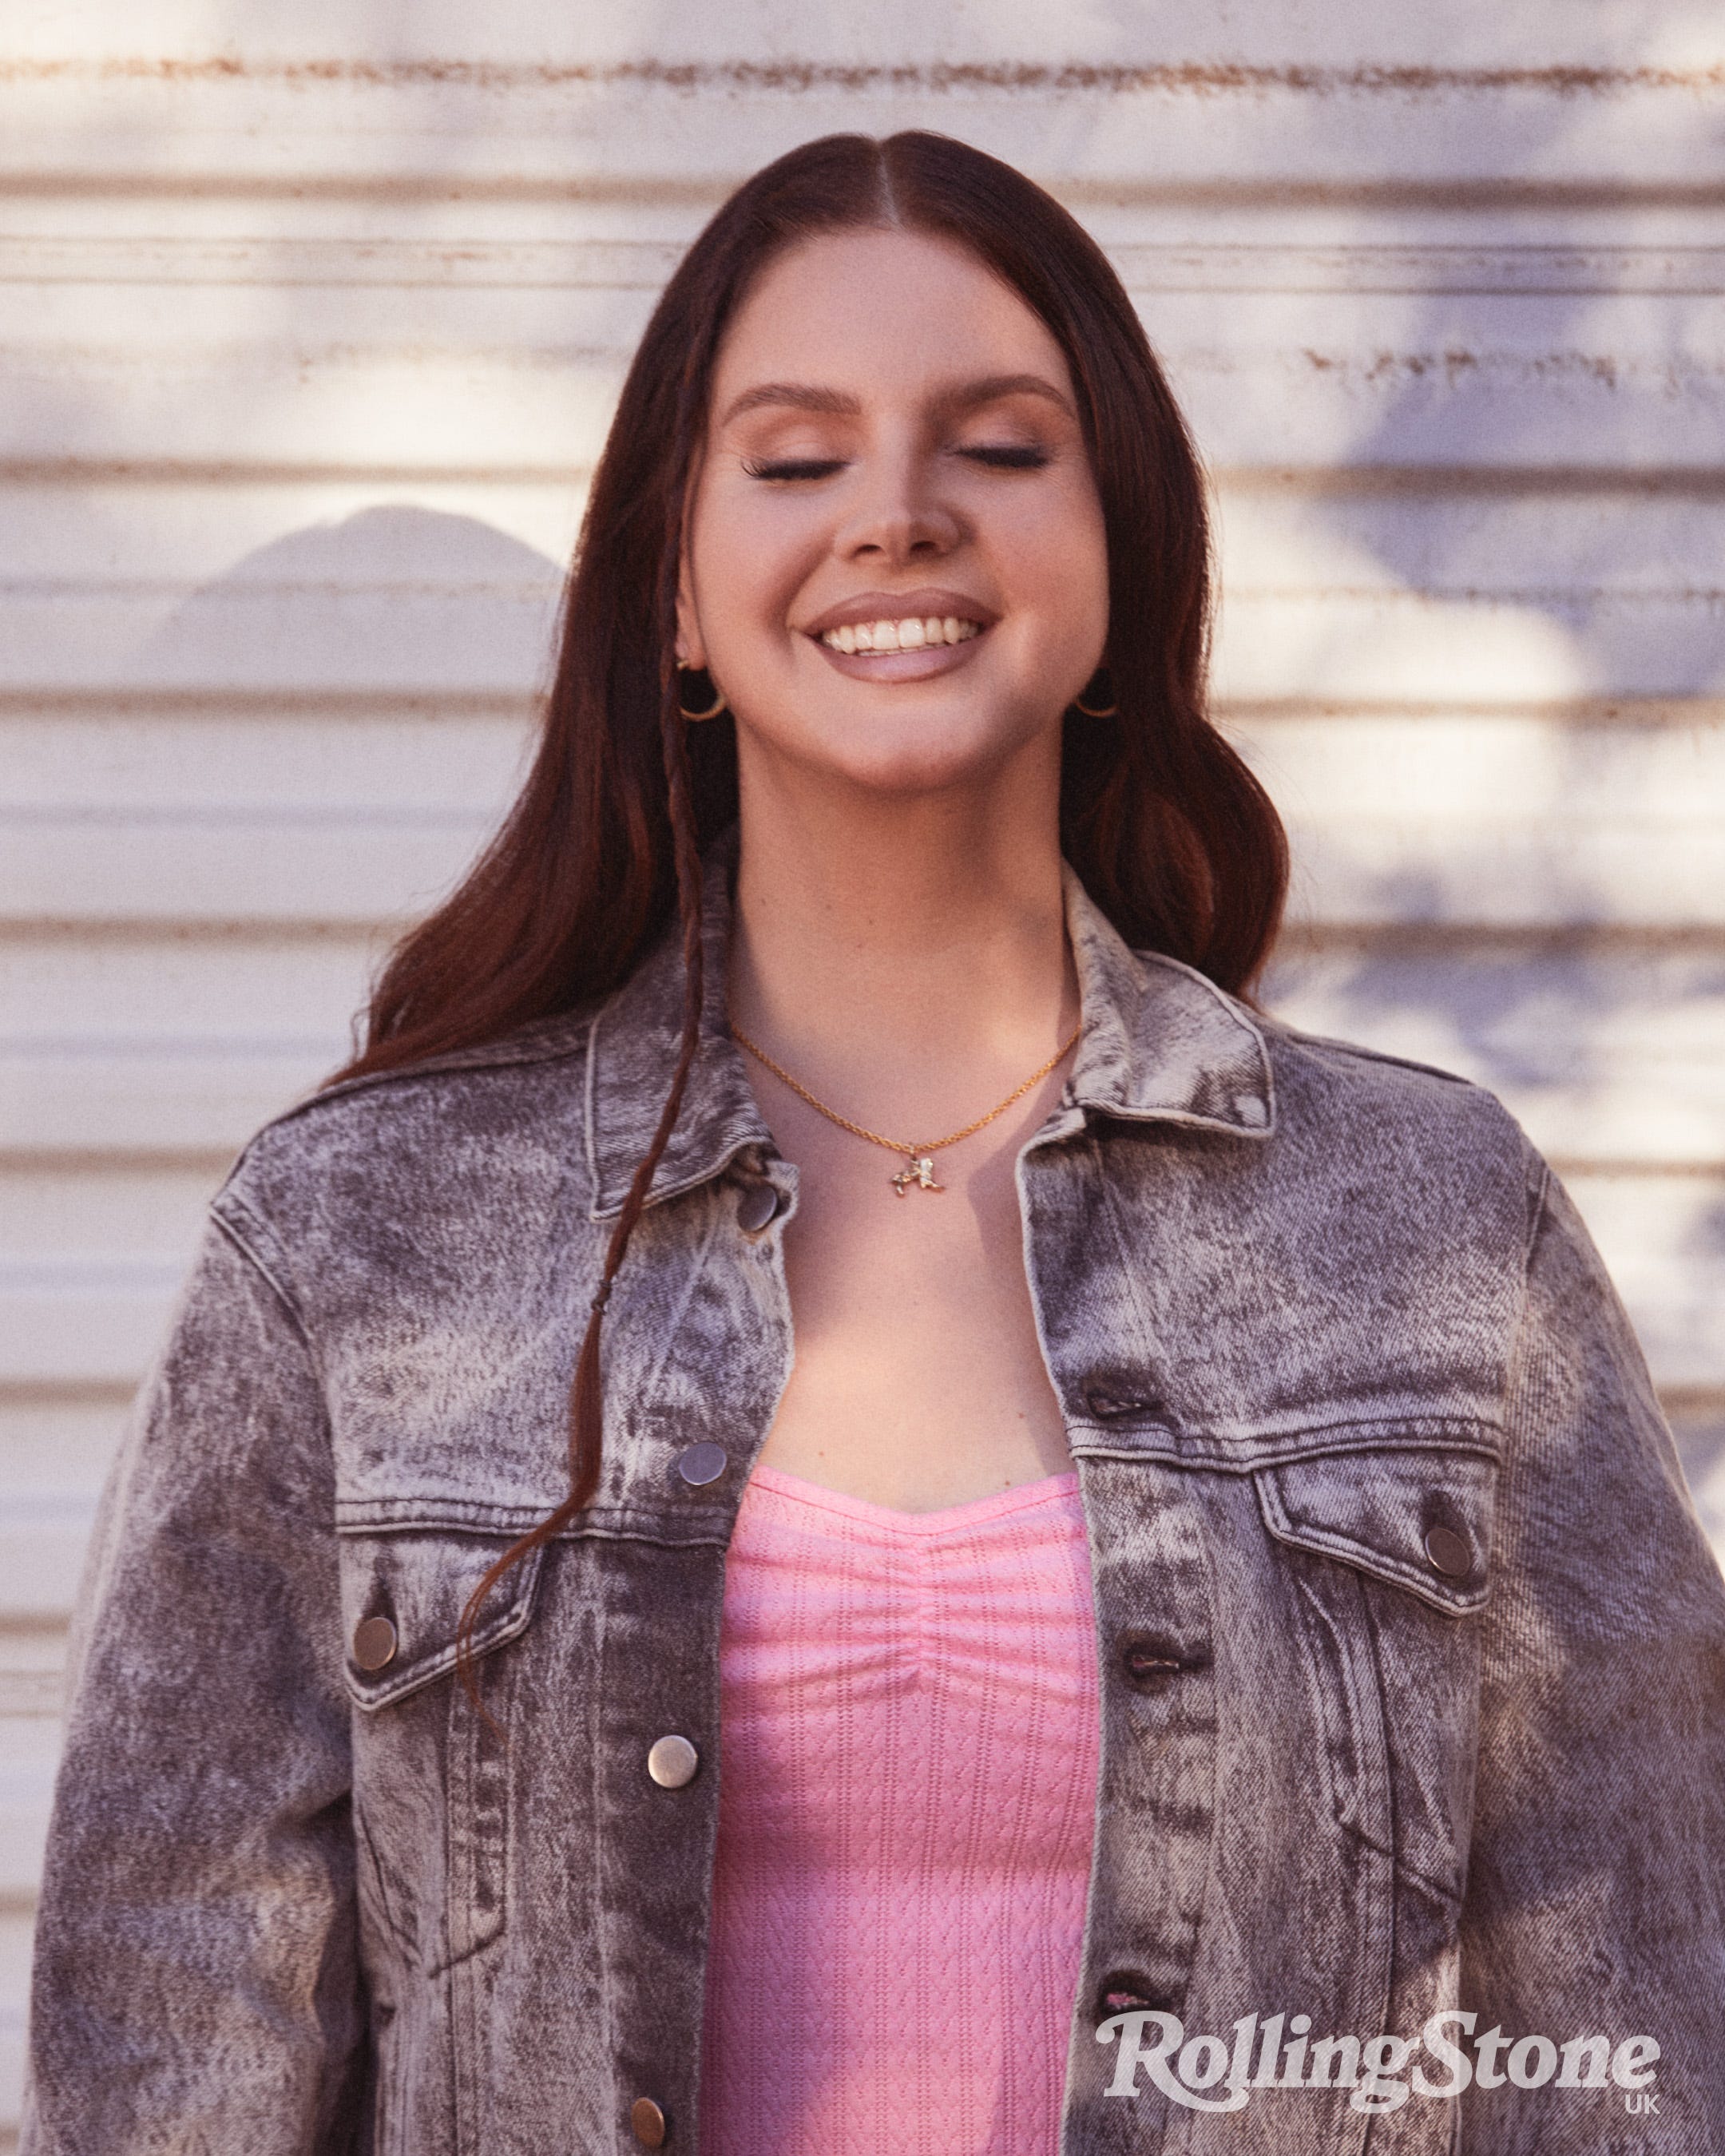 My Goal In Life Is To Have Met Myself' - A Q&A with Lana Del Rey